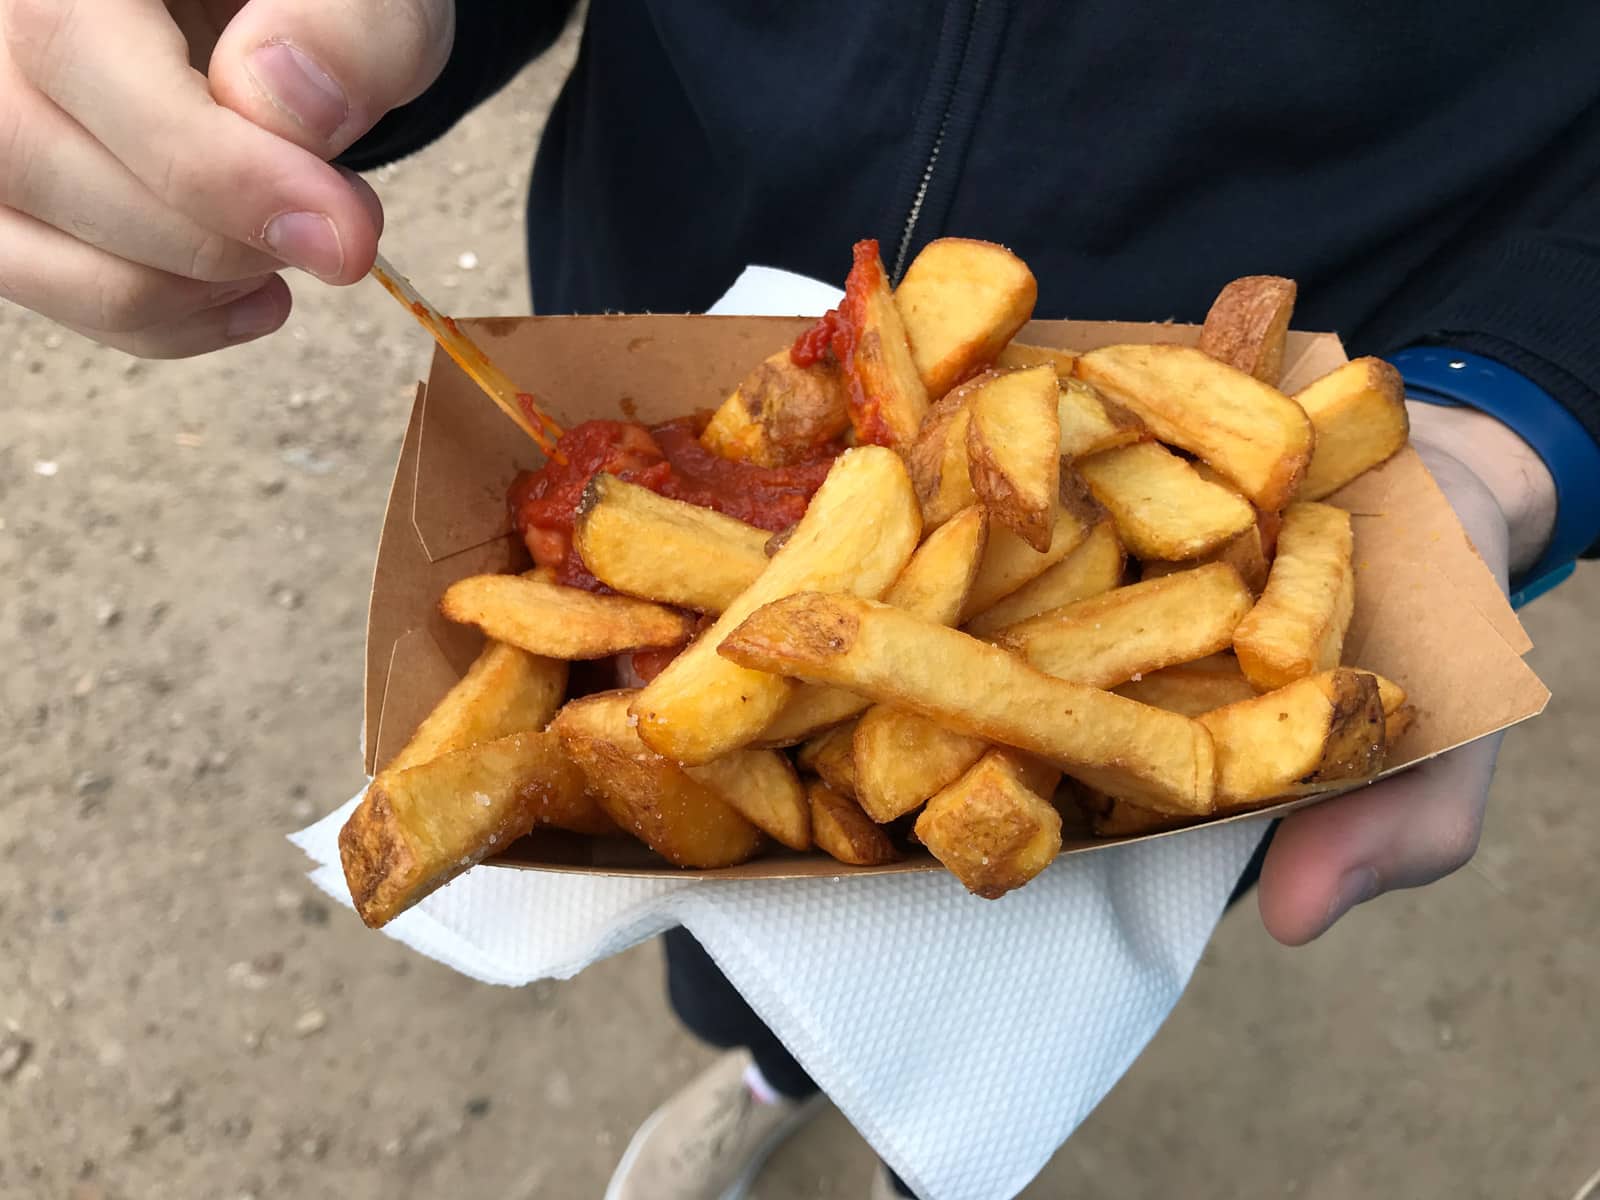 A man’s hand holding a small cardboard tray of chips, chopped sausage and sauce